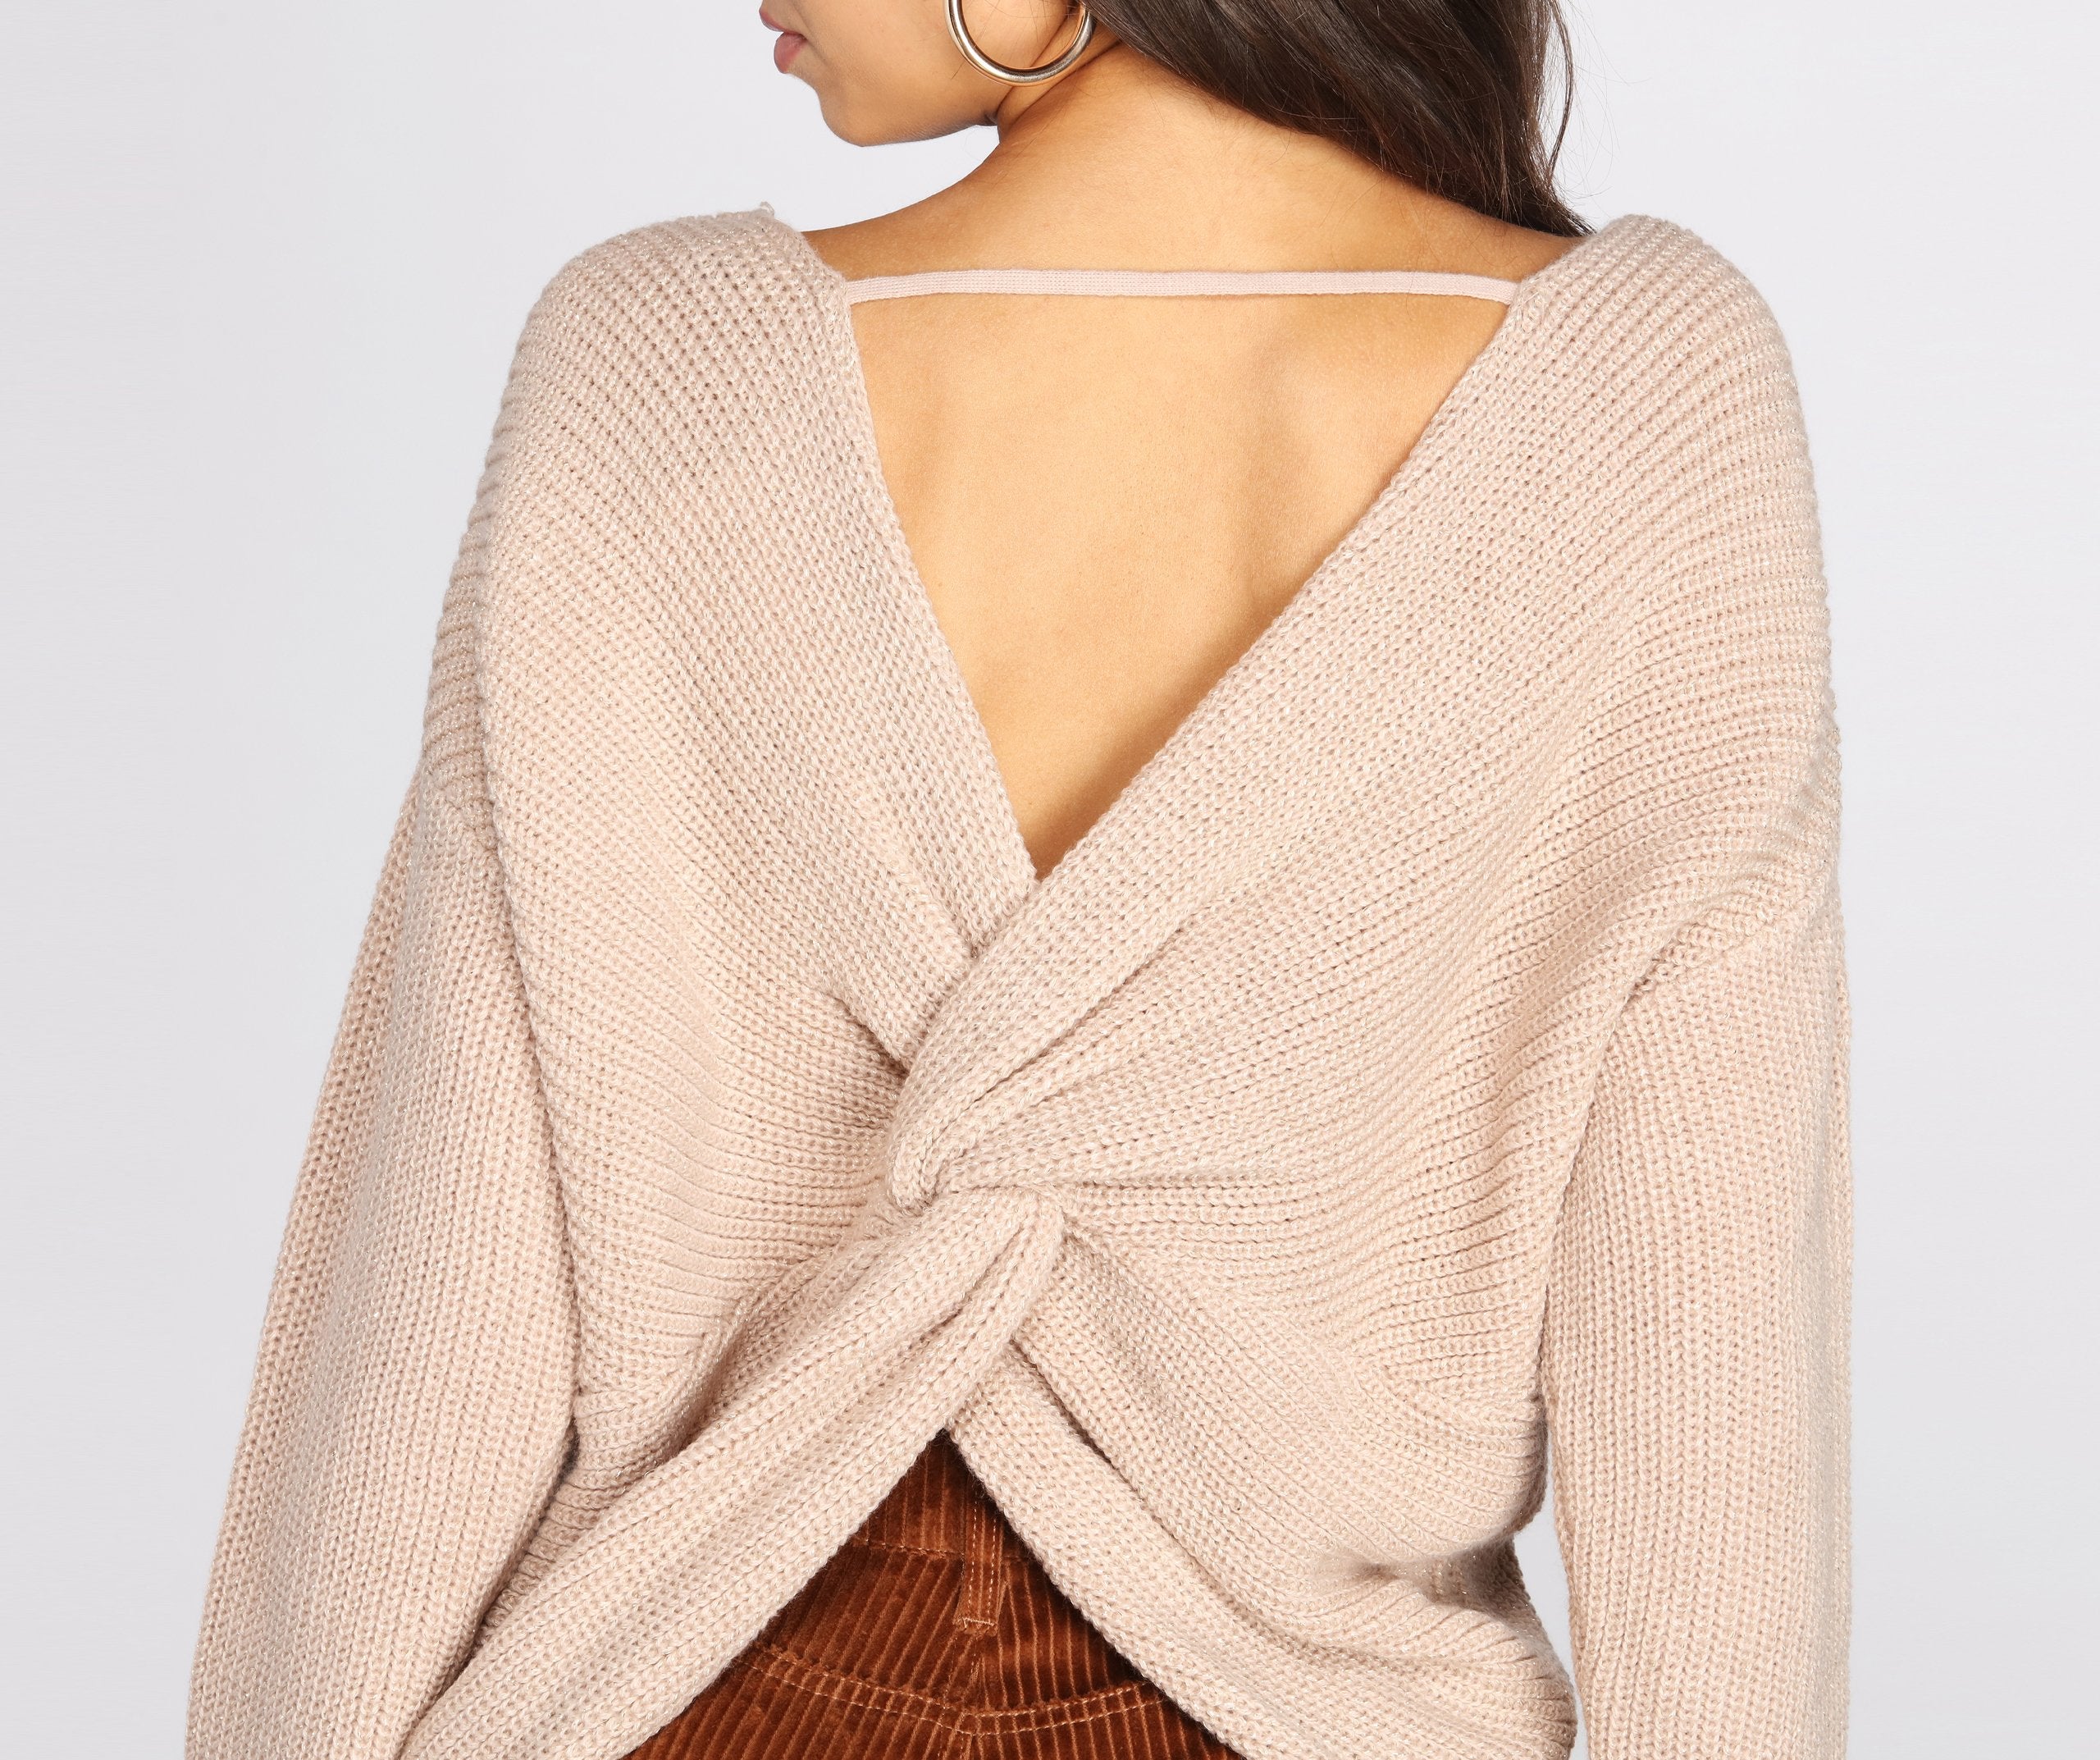 Knot So Innocent Knit Sweater